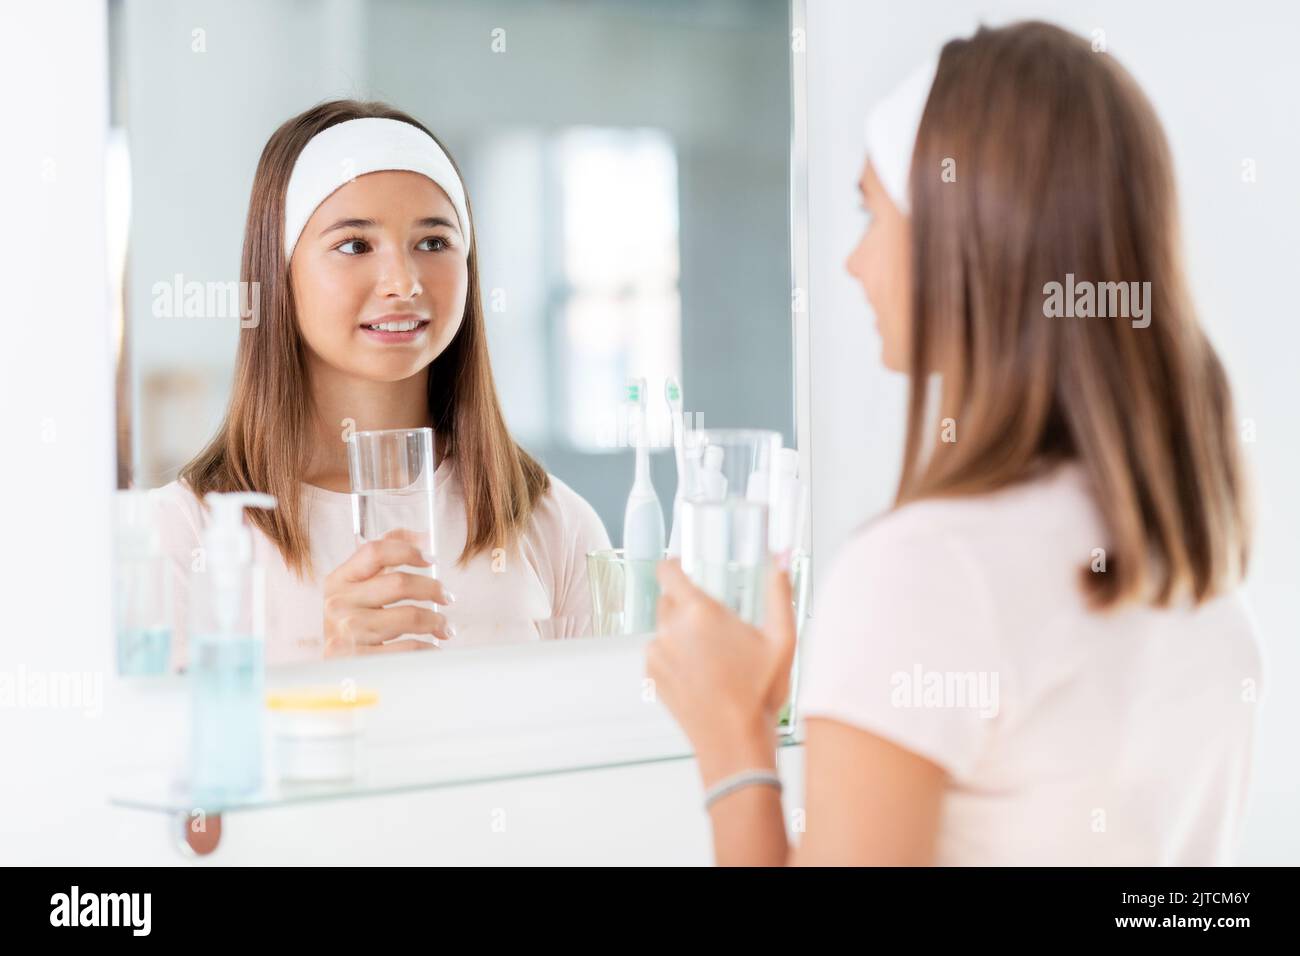 teenage girl with glass of water looking in mirror Stock Photo